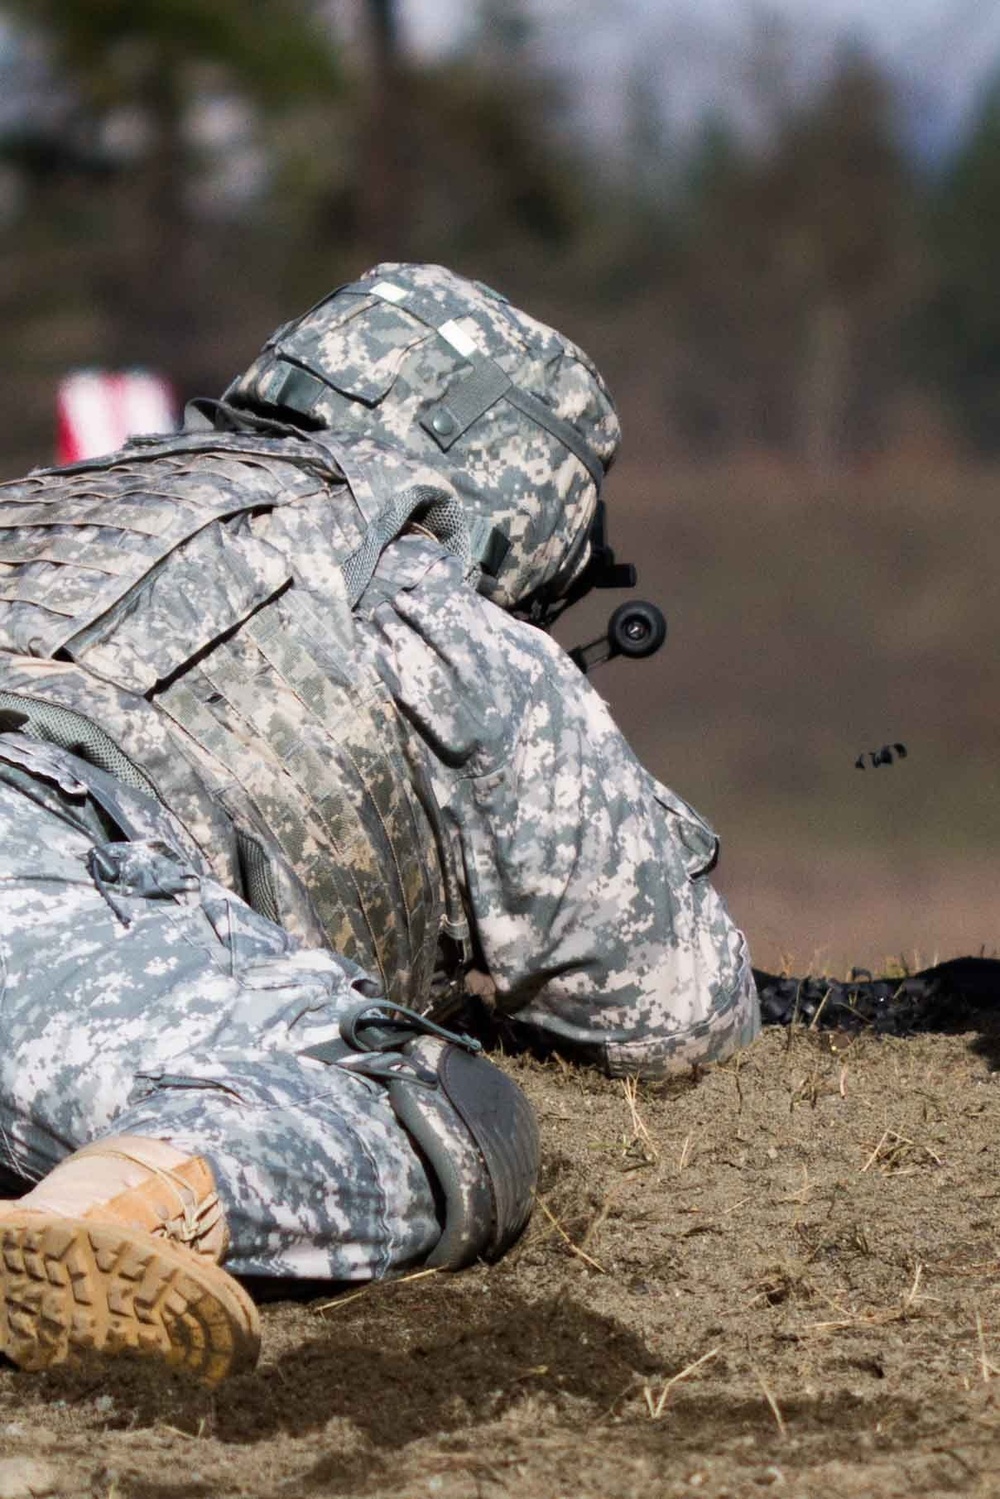 Real-life Halo: Soldiers learn advancements in modern warfare weapons technology